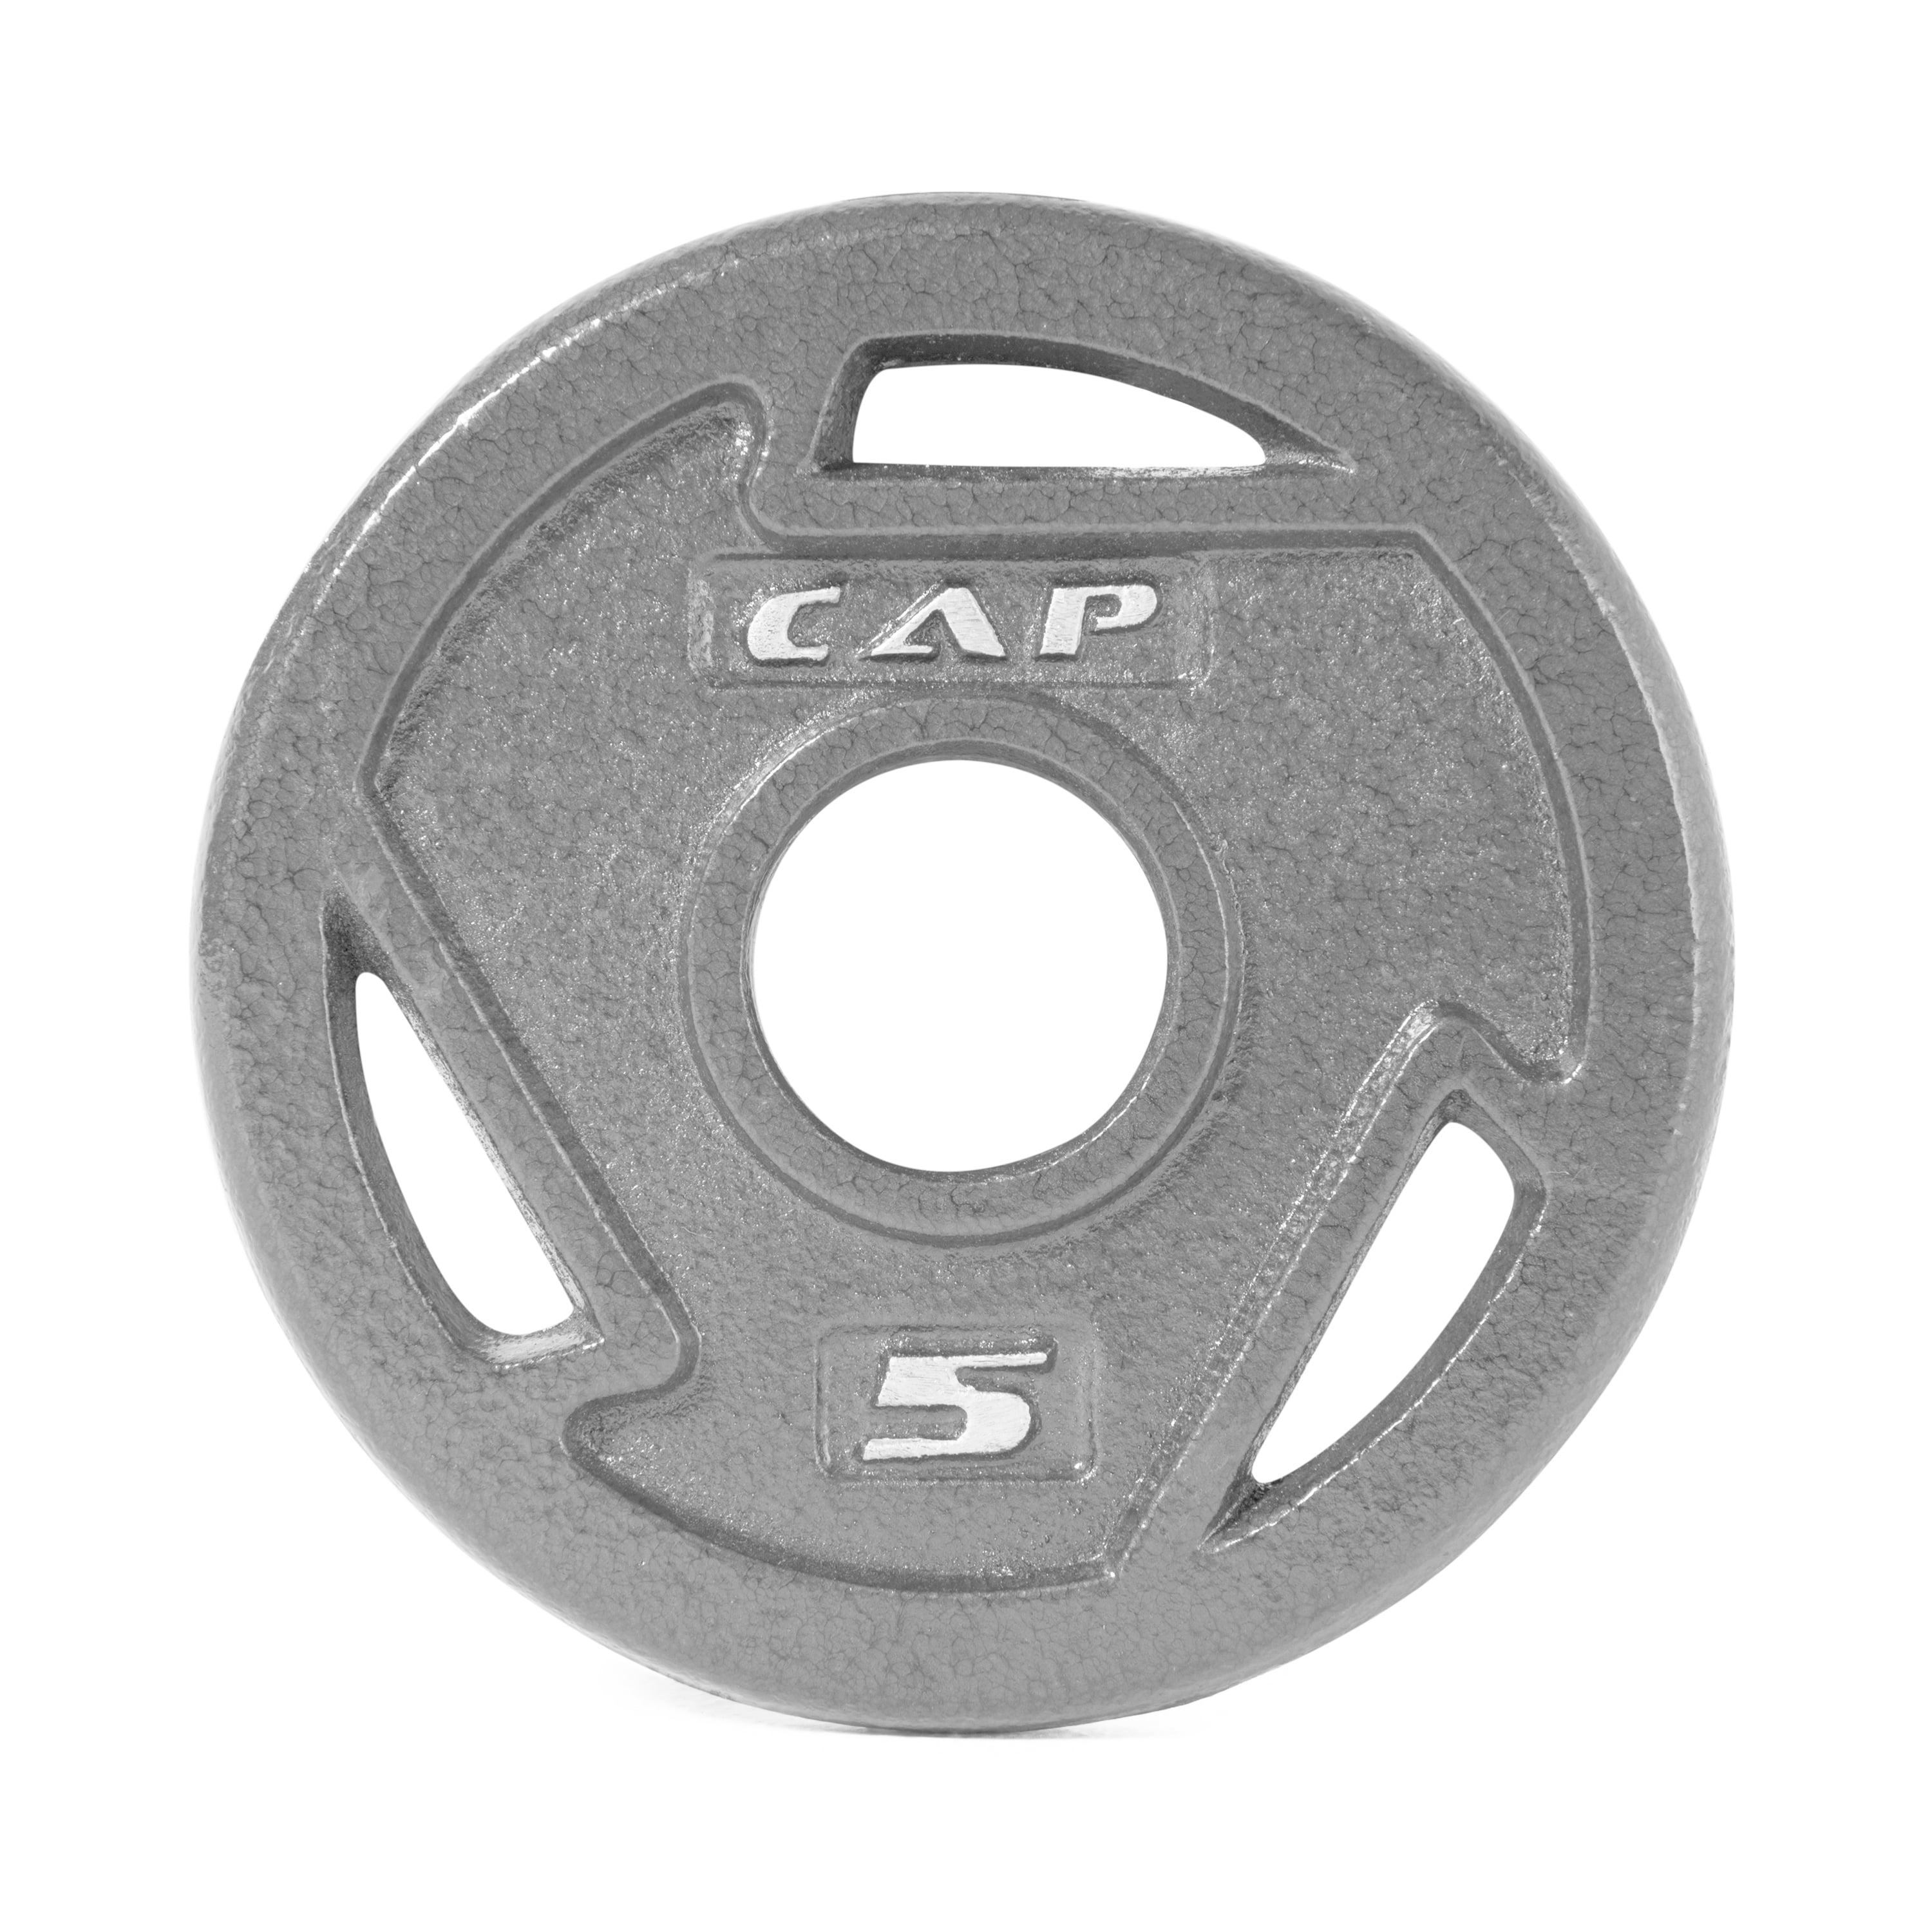 SINGLE 2 Inch 45 lb Pound 5 Lb Pound Olympic Grip Barbell Weight Plate CAP 